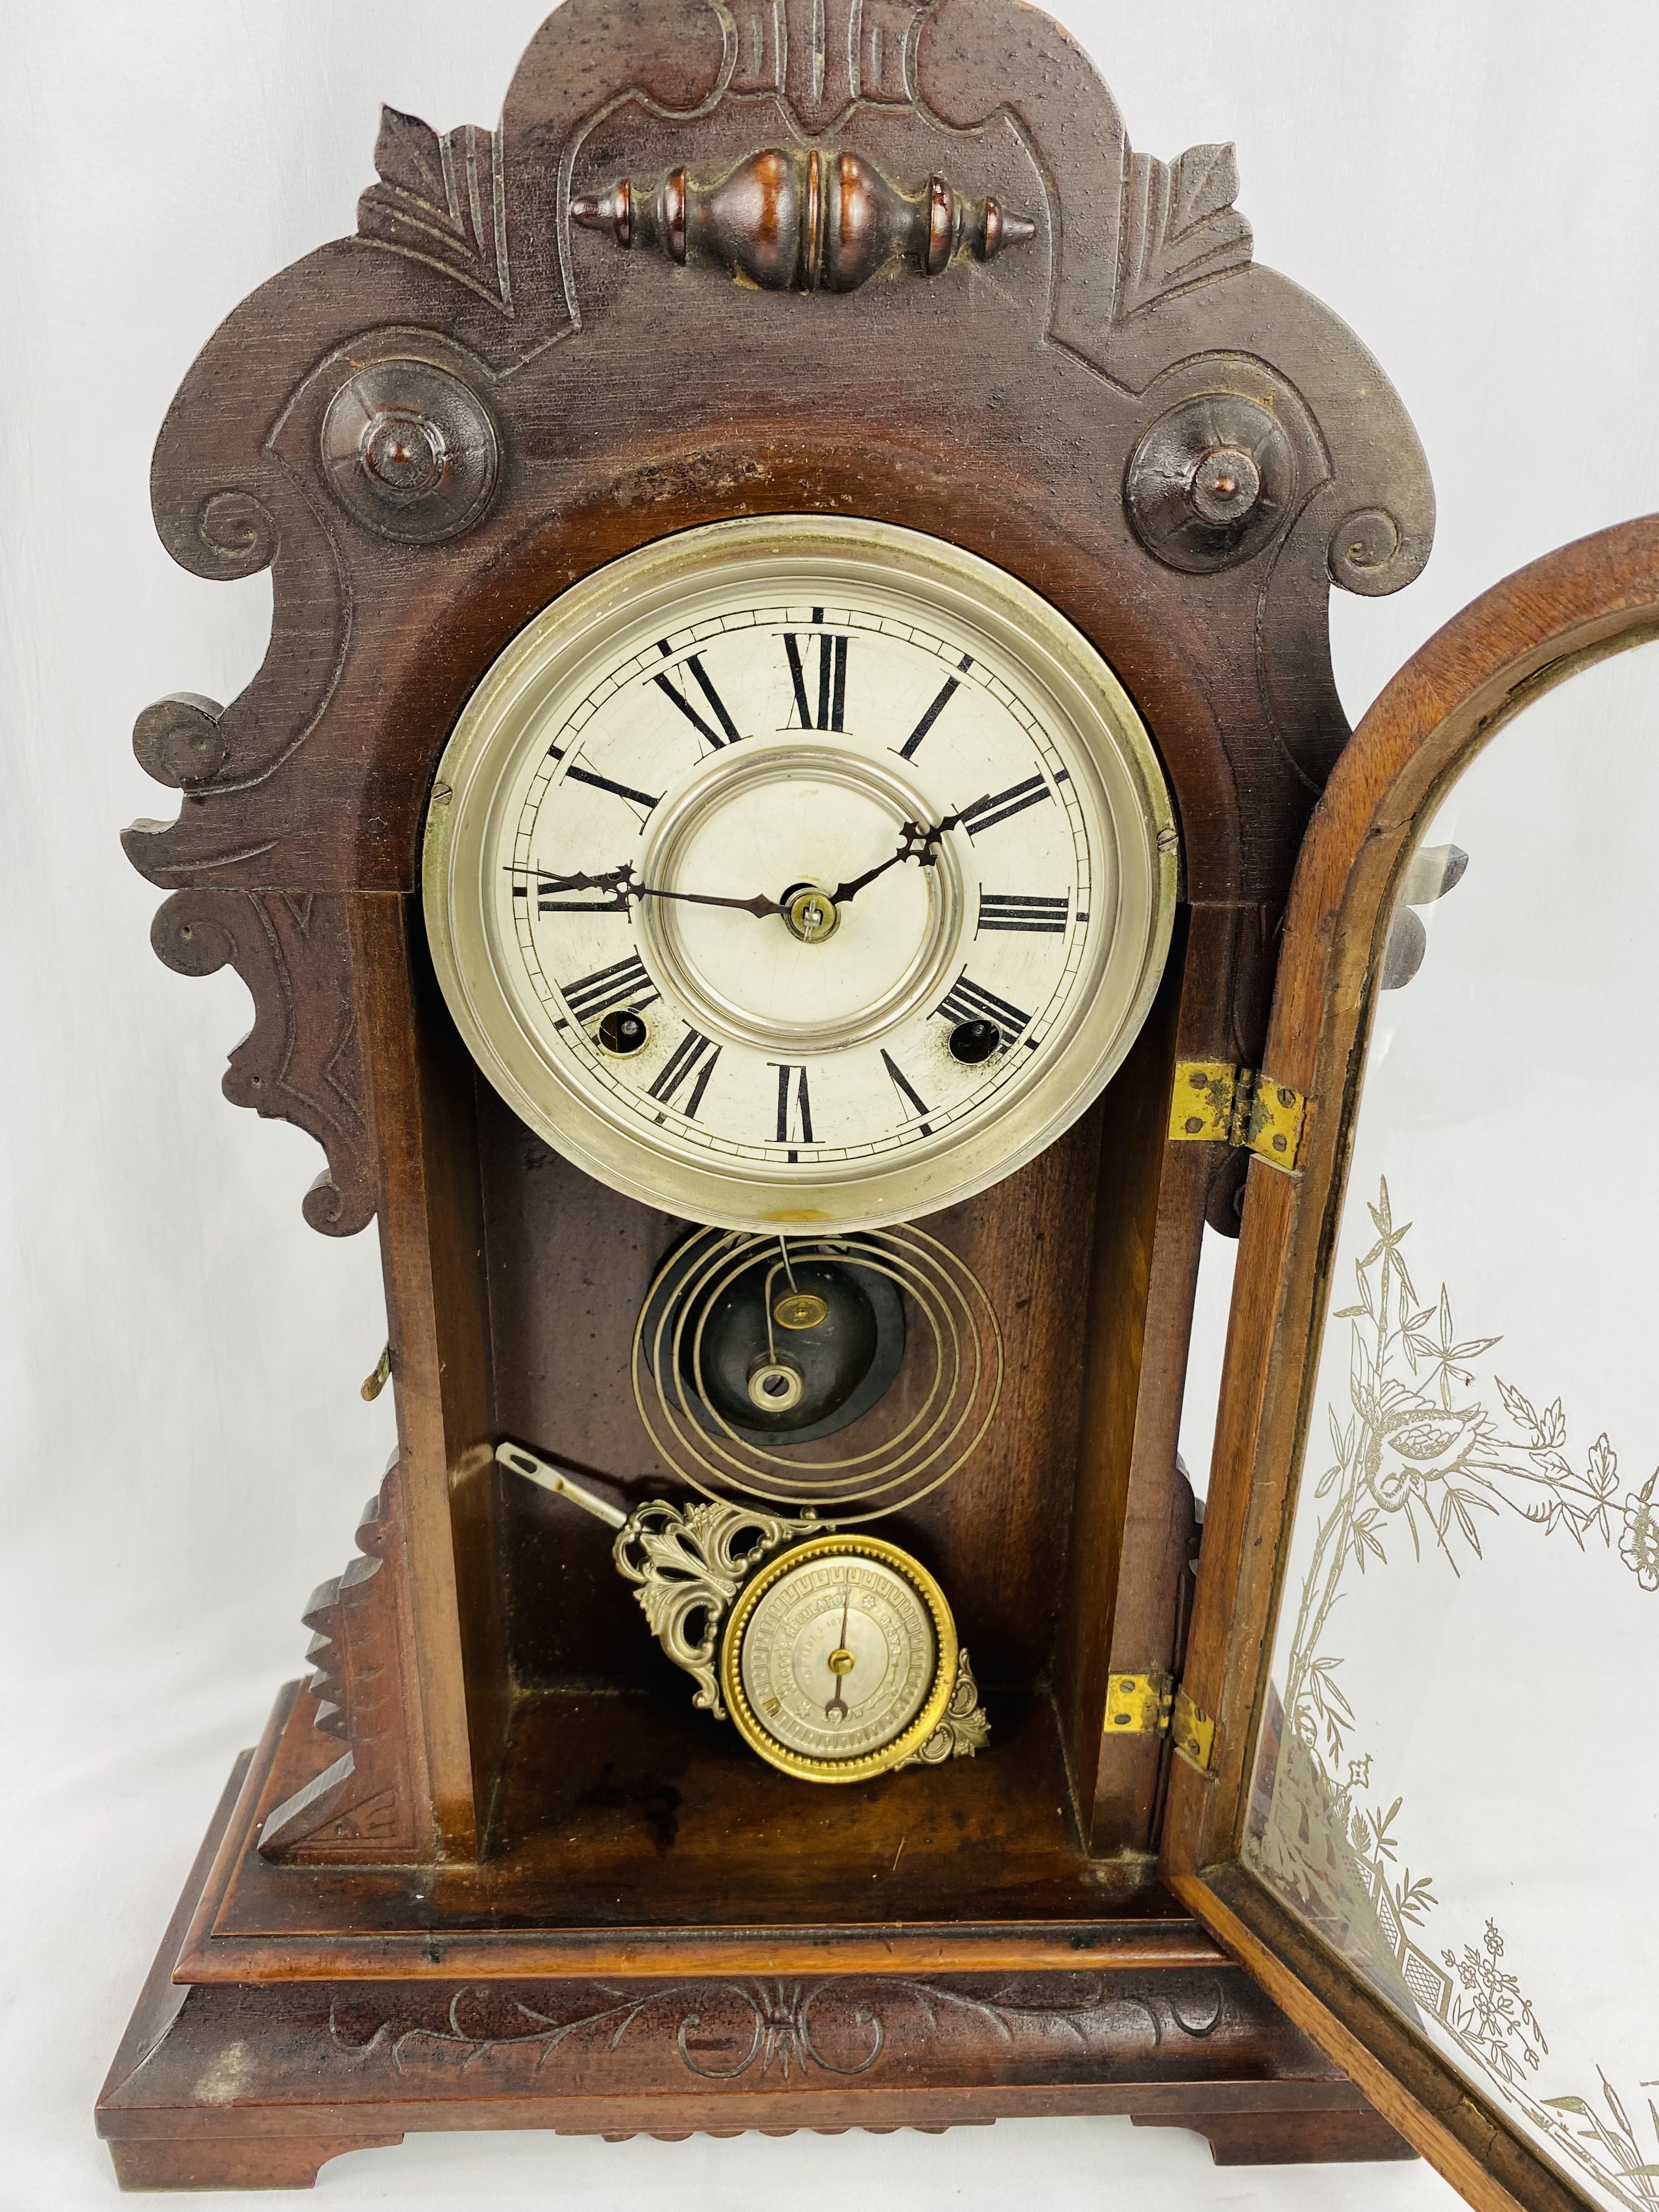 Wood cased mantel clock together with a wall mounted barometer - Image 3 of 6